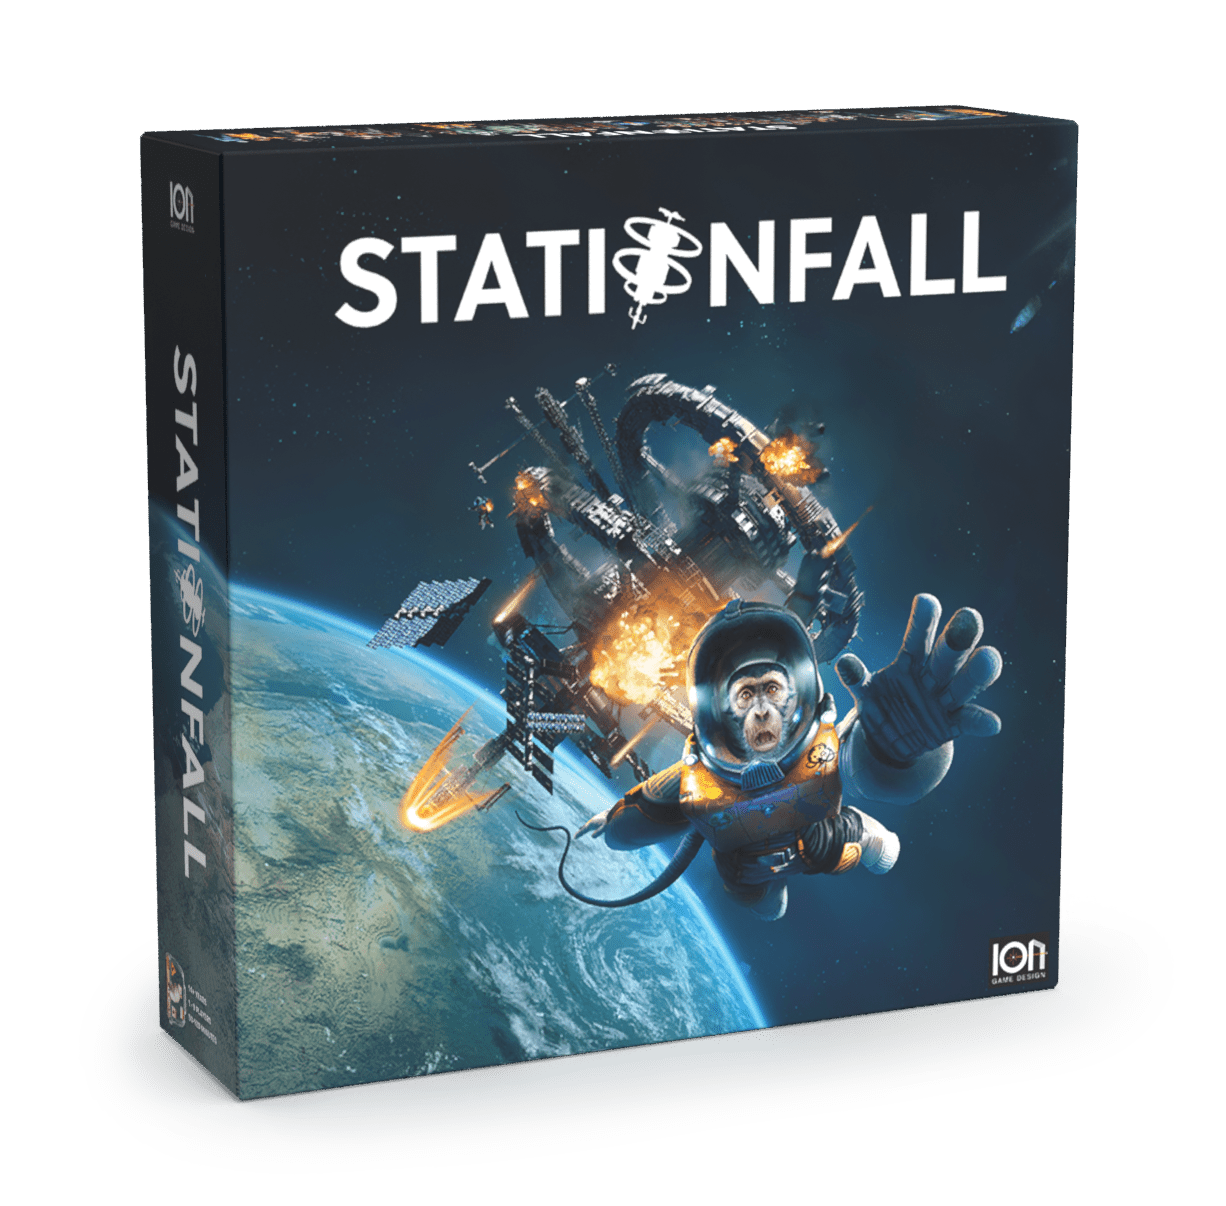 Stationfall is more than a board game version of Among Us